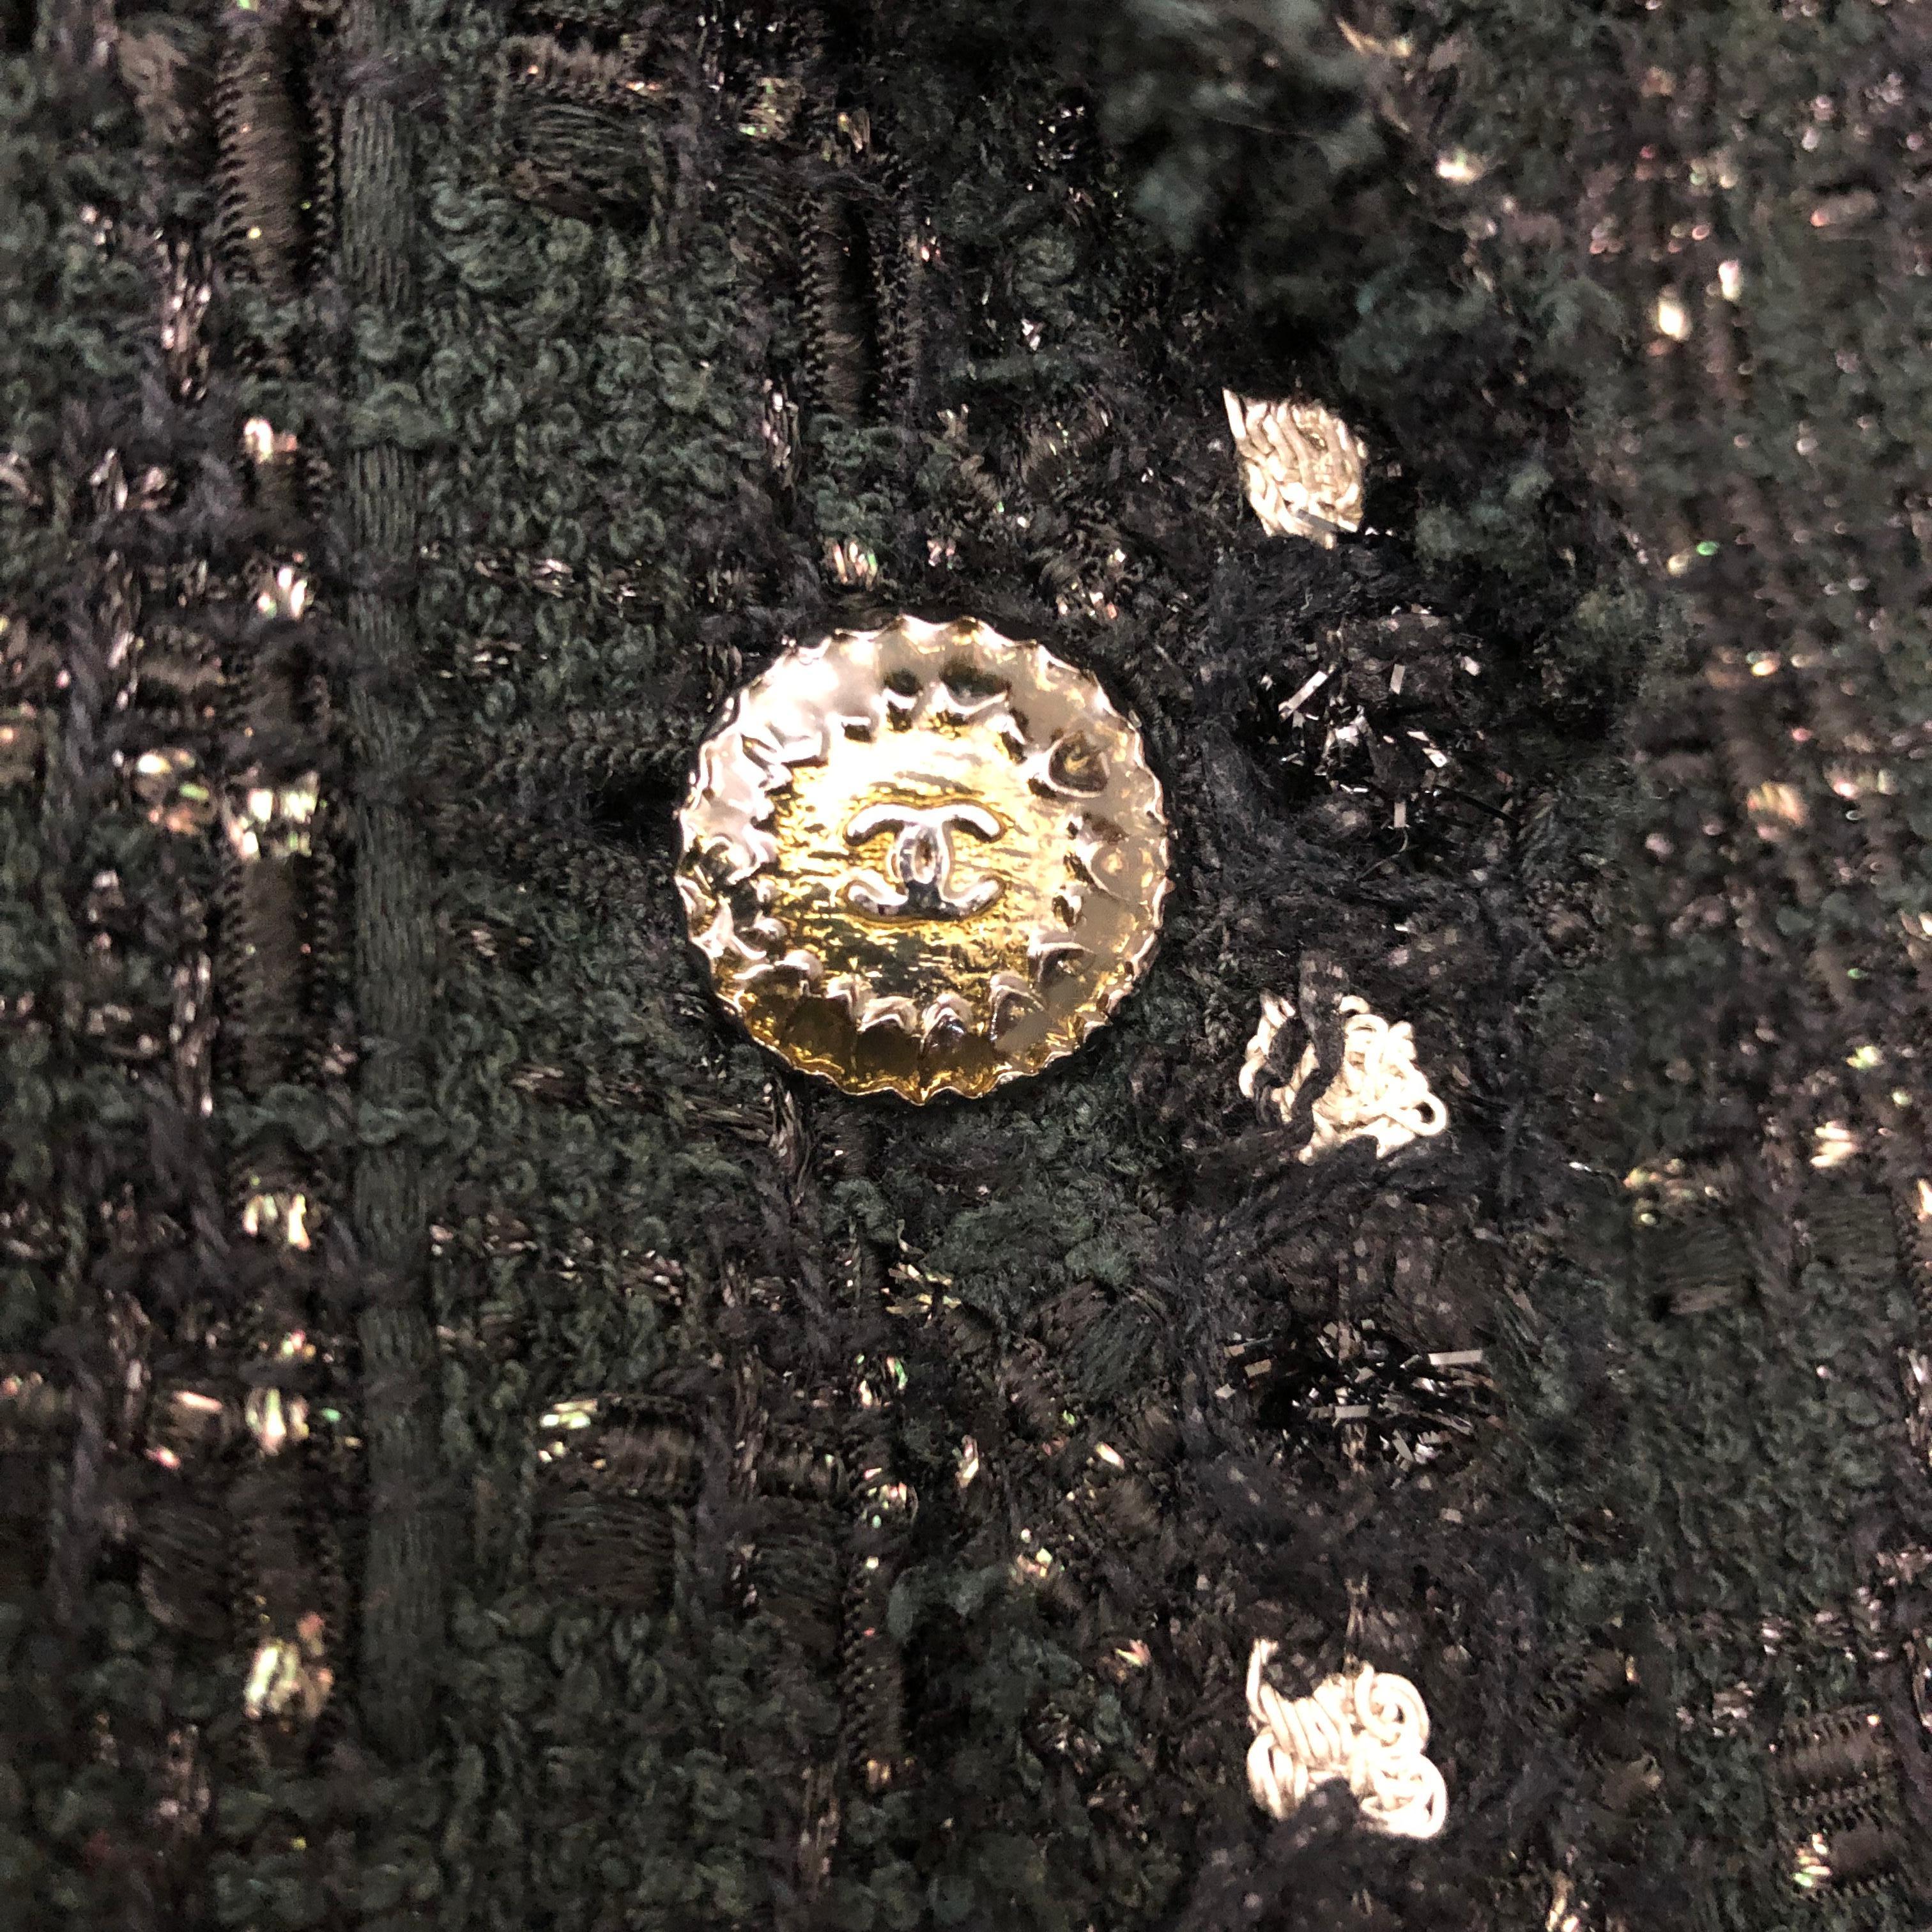 Women's or Men's Chanel Cotton/Rayon Black and Dark Green with Multi-Colours Tweed Jacket  For Sale